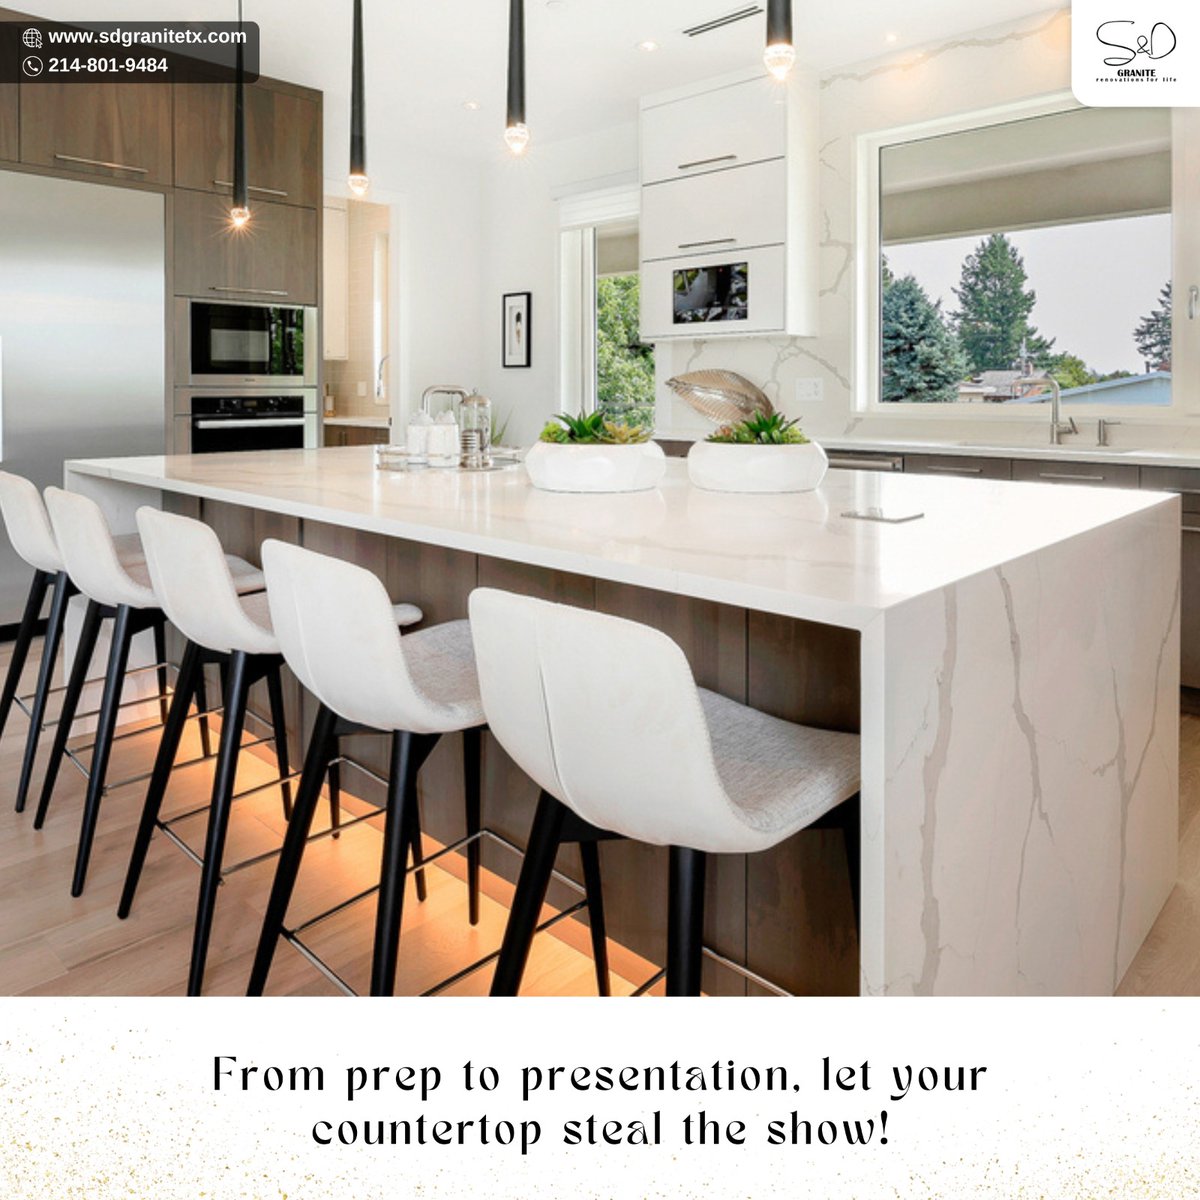 Experience the beauty of nature every day with granite countertops.

Contact us for more:
Visit - sdgranitetx.com
Call - 214-801-9484

#marble #interiordesign #design #granite #architecture #stone #naturalstone #homedecor #interior #art #marbledesign